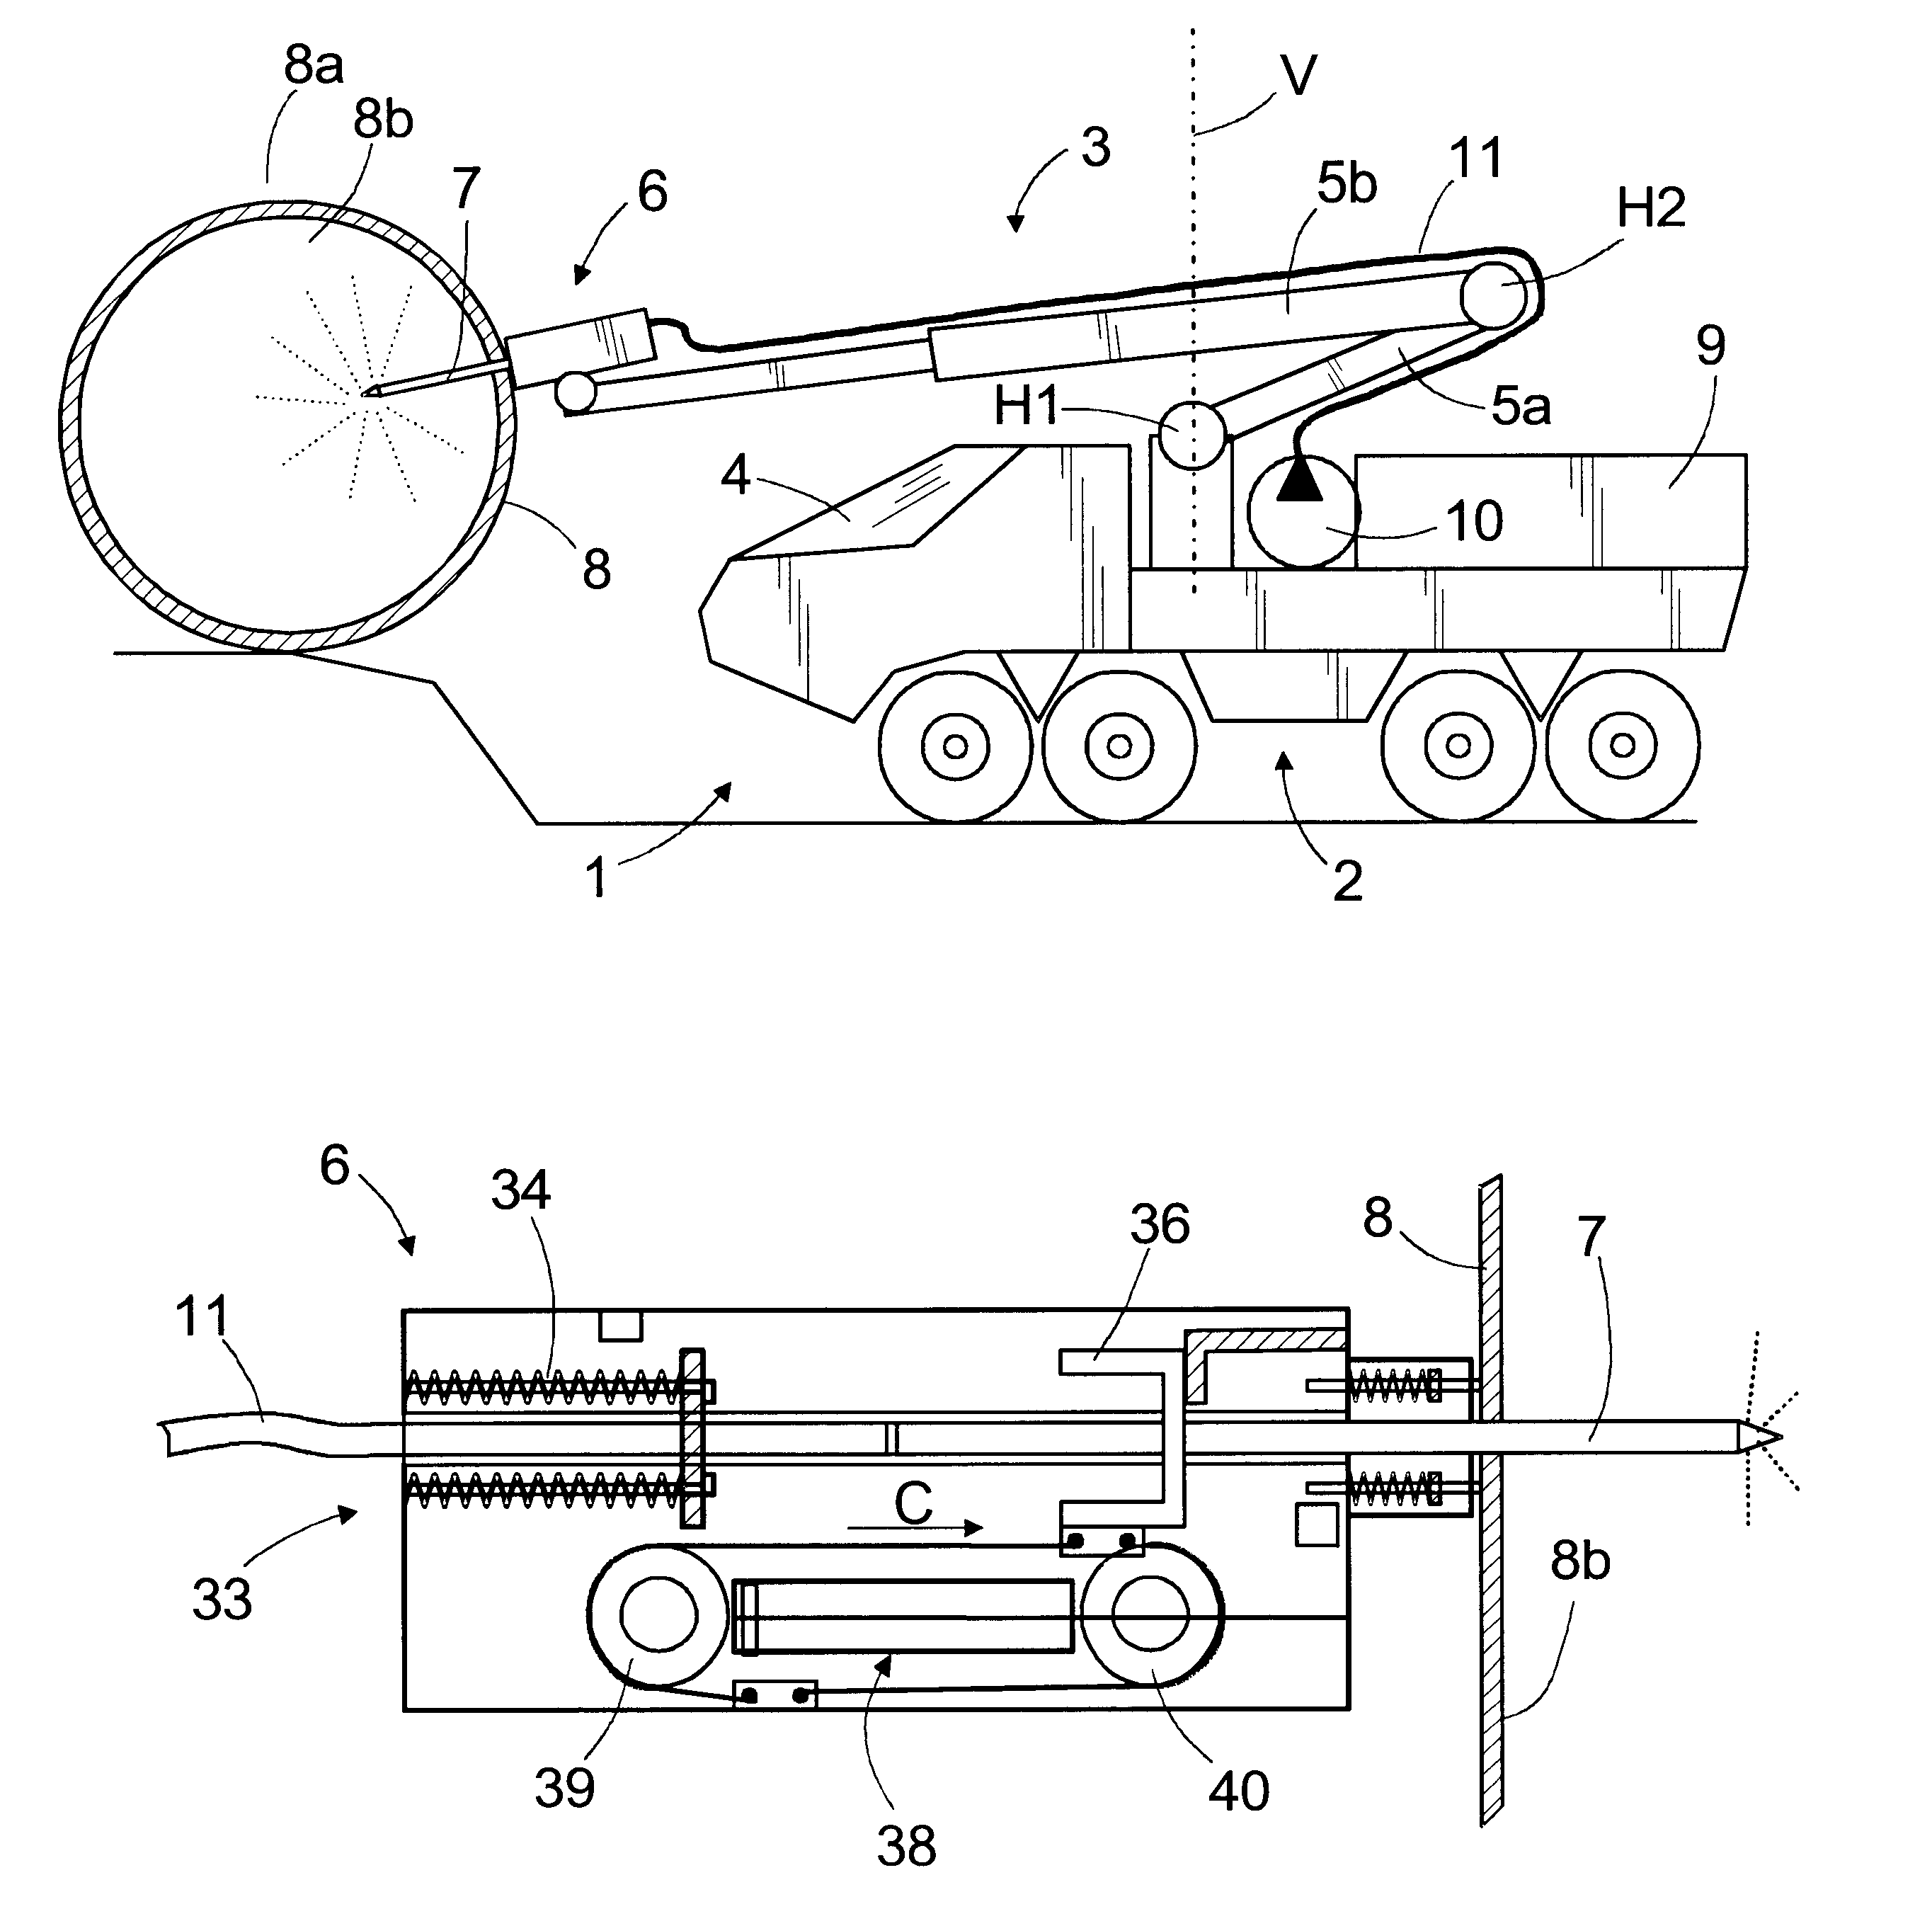 Piercing device for fire-fighting system